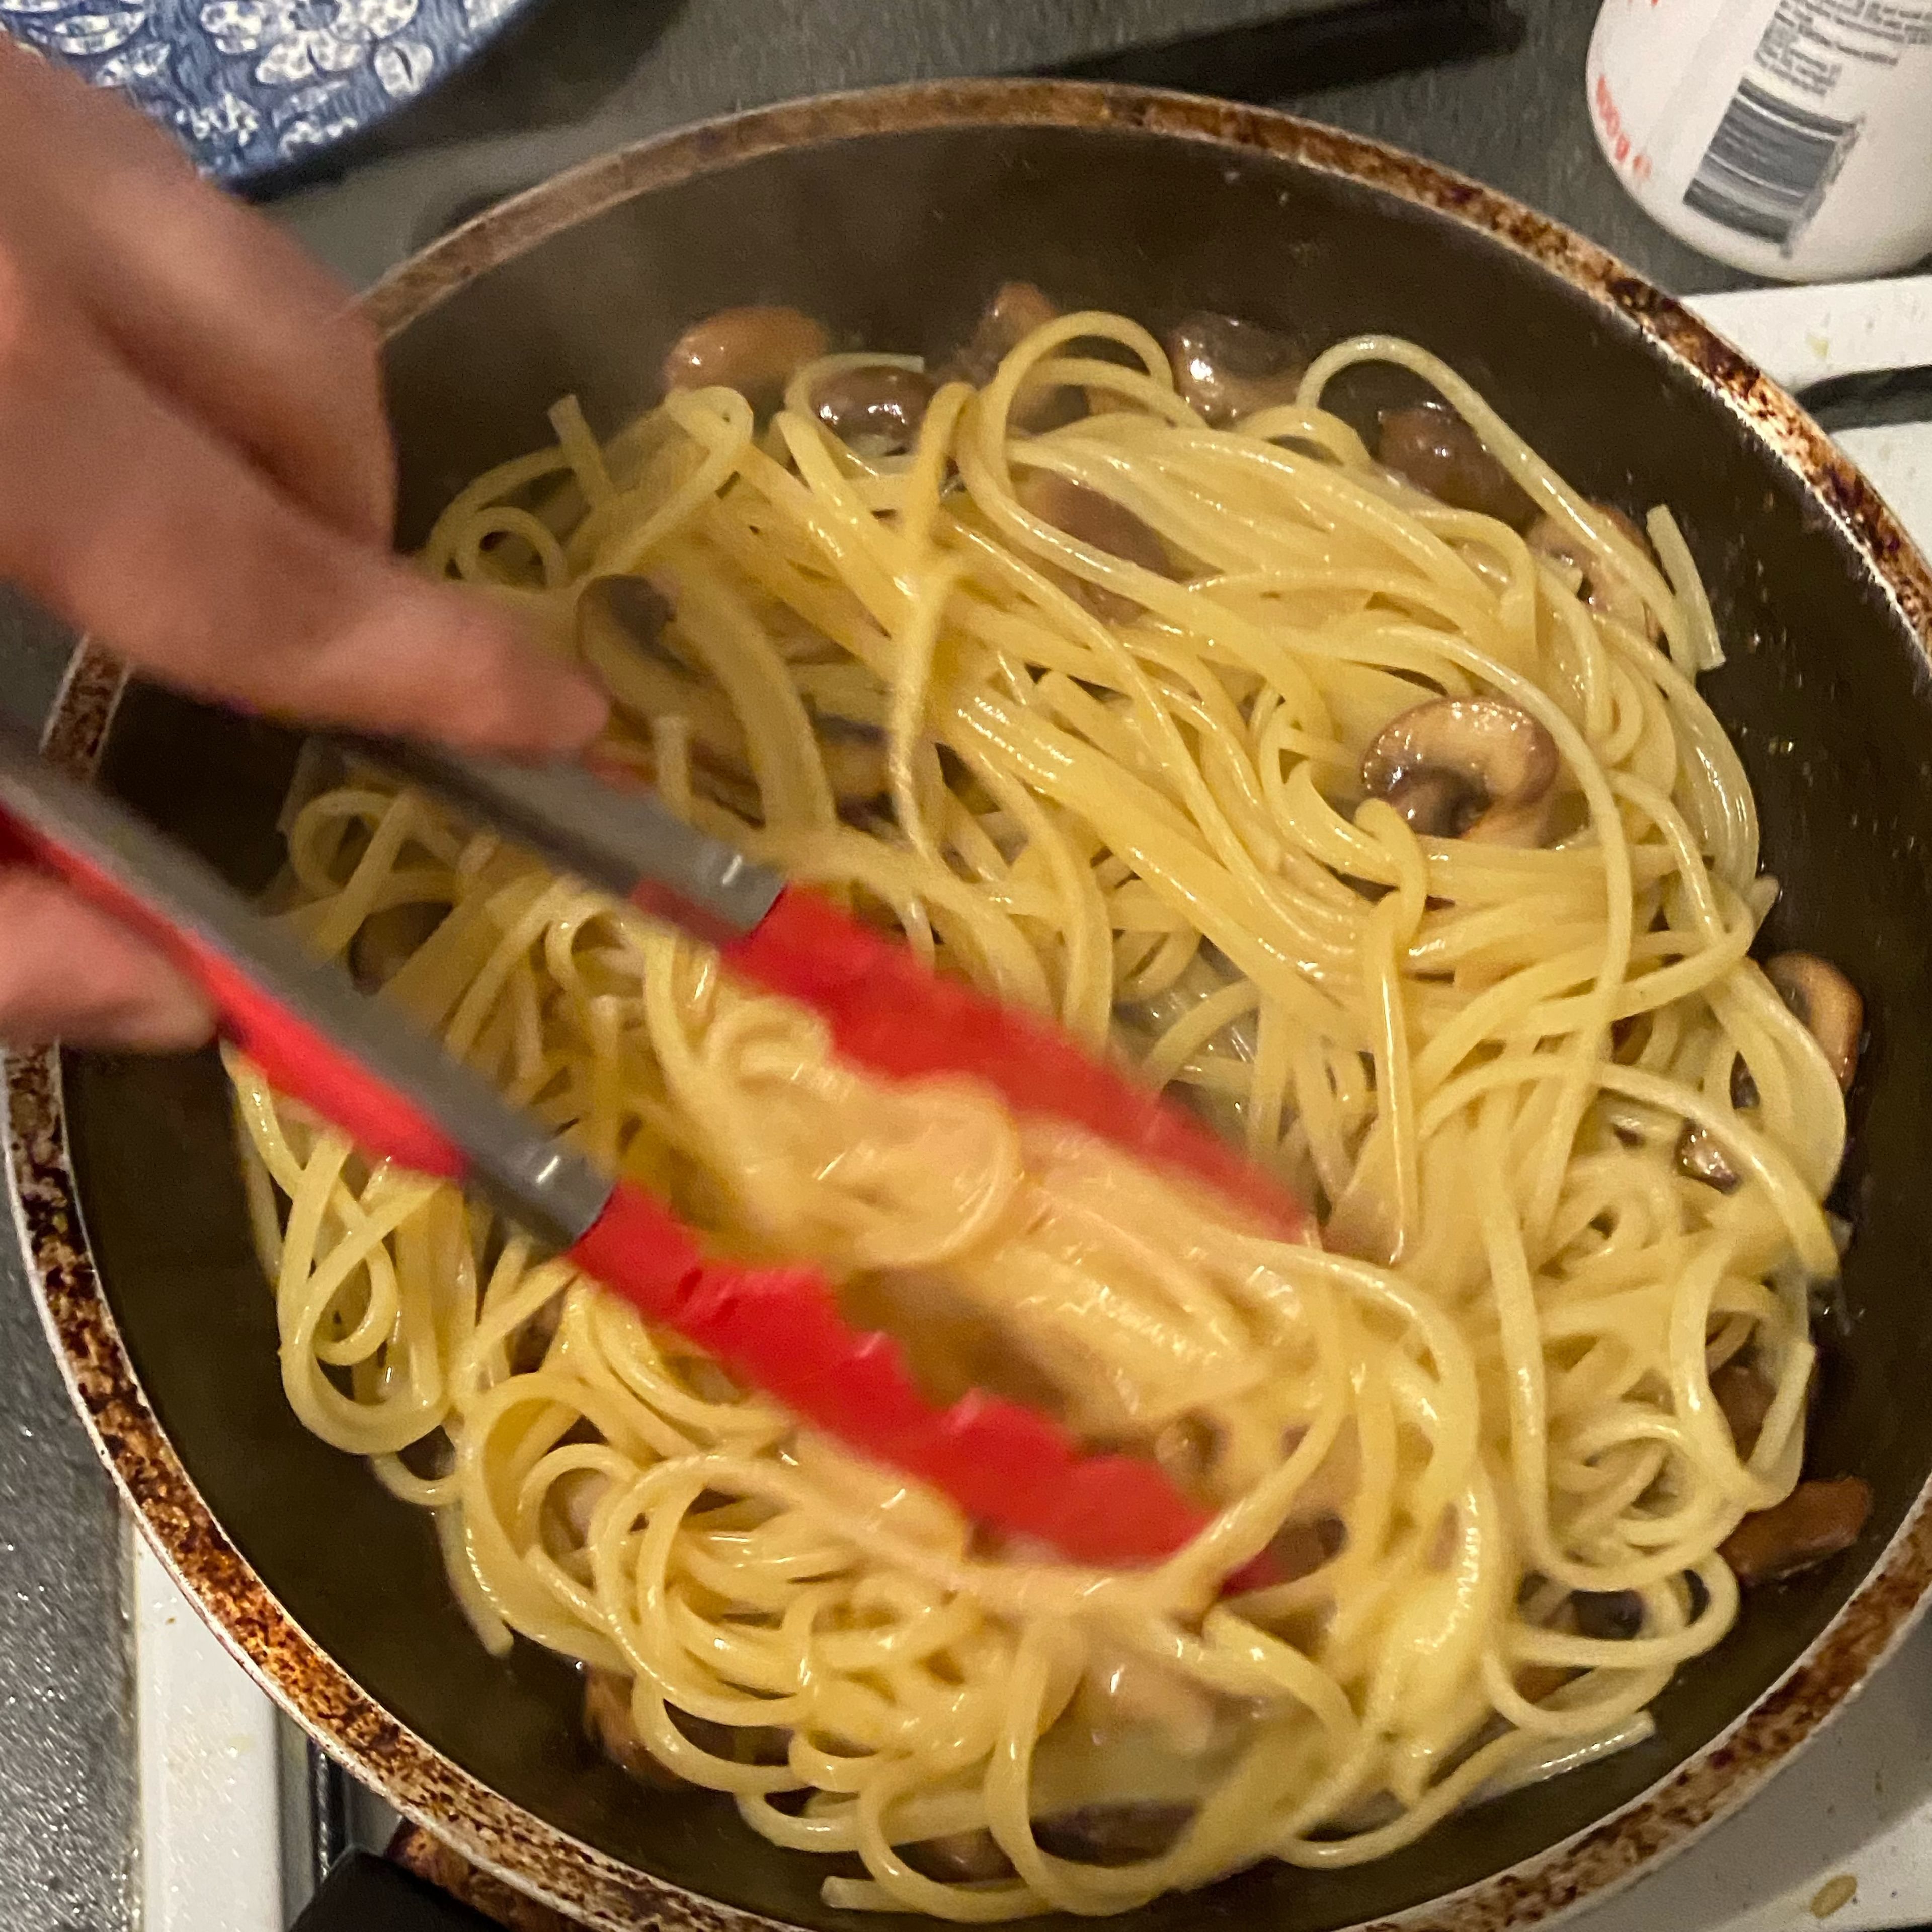 When pasta is done put in the pan and combine with the mushrooms. Add a bit of the pasta water